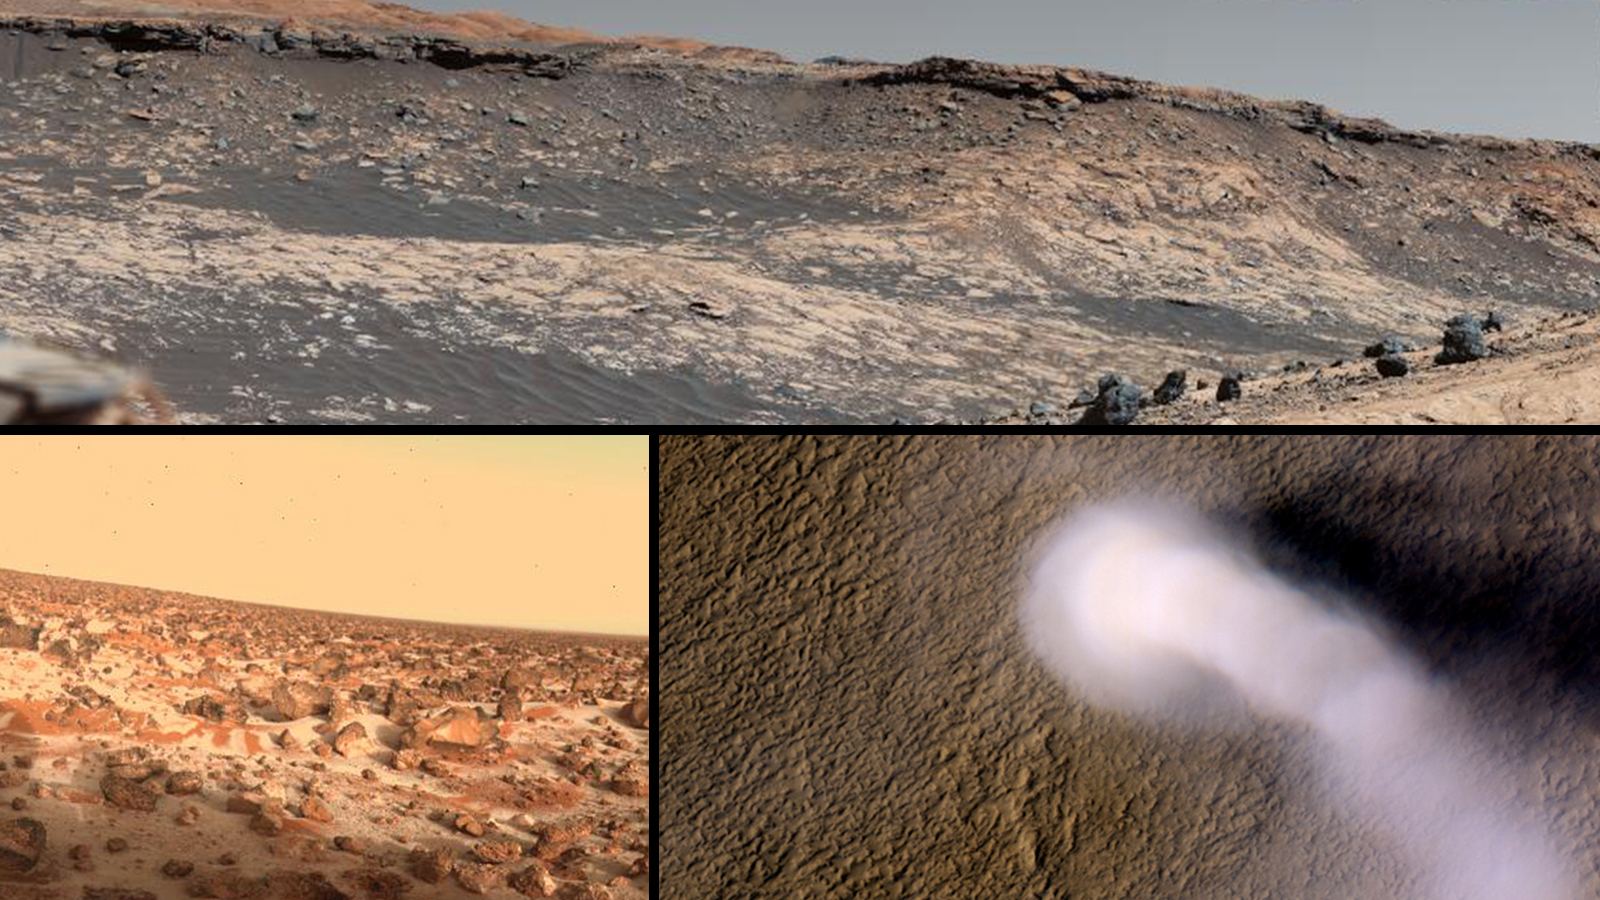 A collage of images of Mars shows a rocky, hilly landscape, an overhead view of a dust devil moving across brown plains, and a rock-filled slope with patches of white frost.